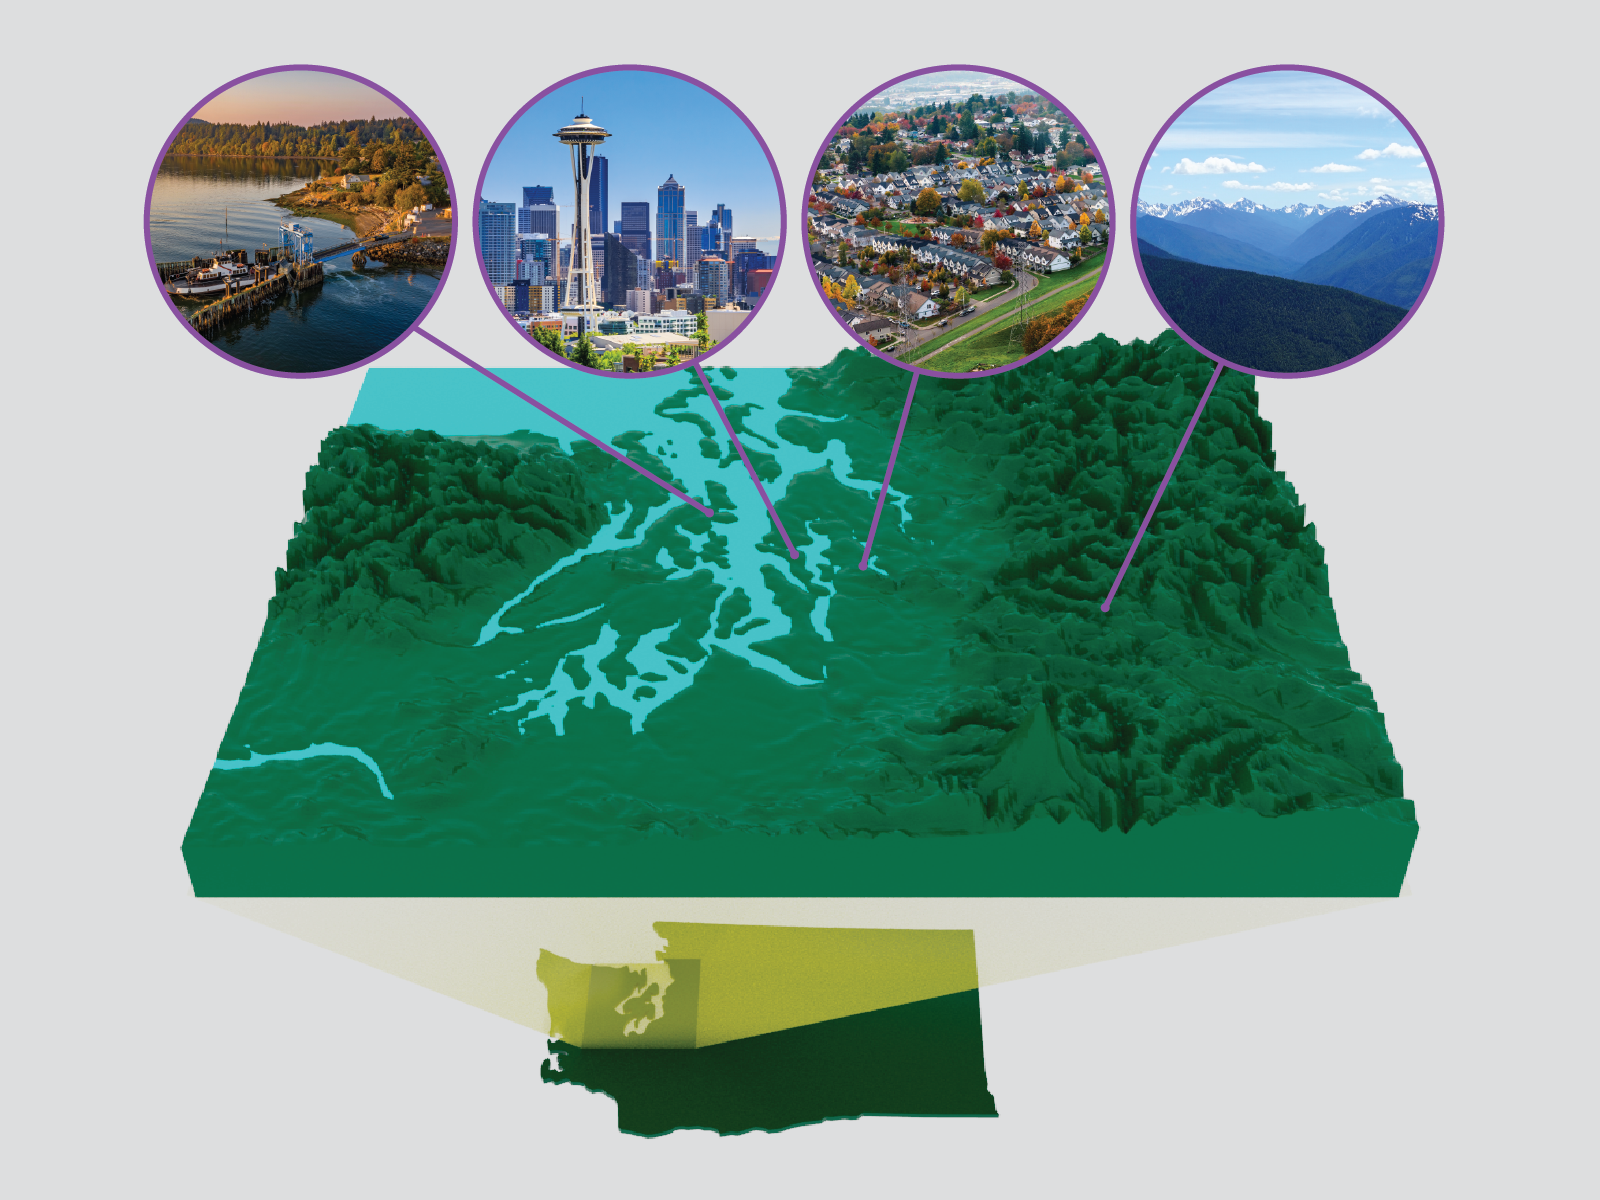 Illustration showing the multiple aspects of the Puget Sound region